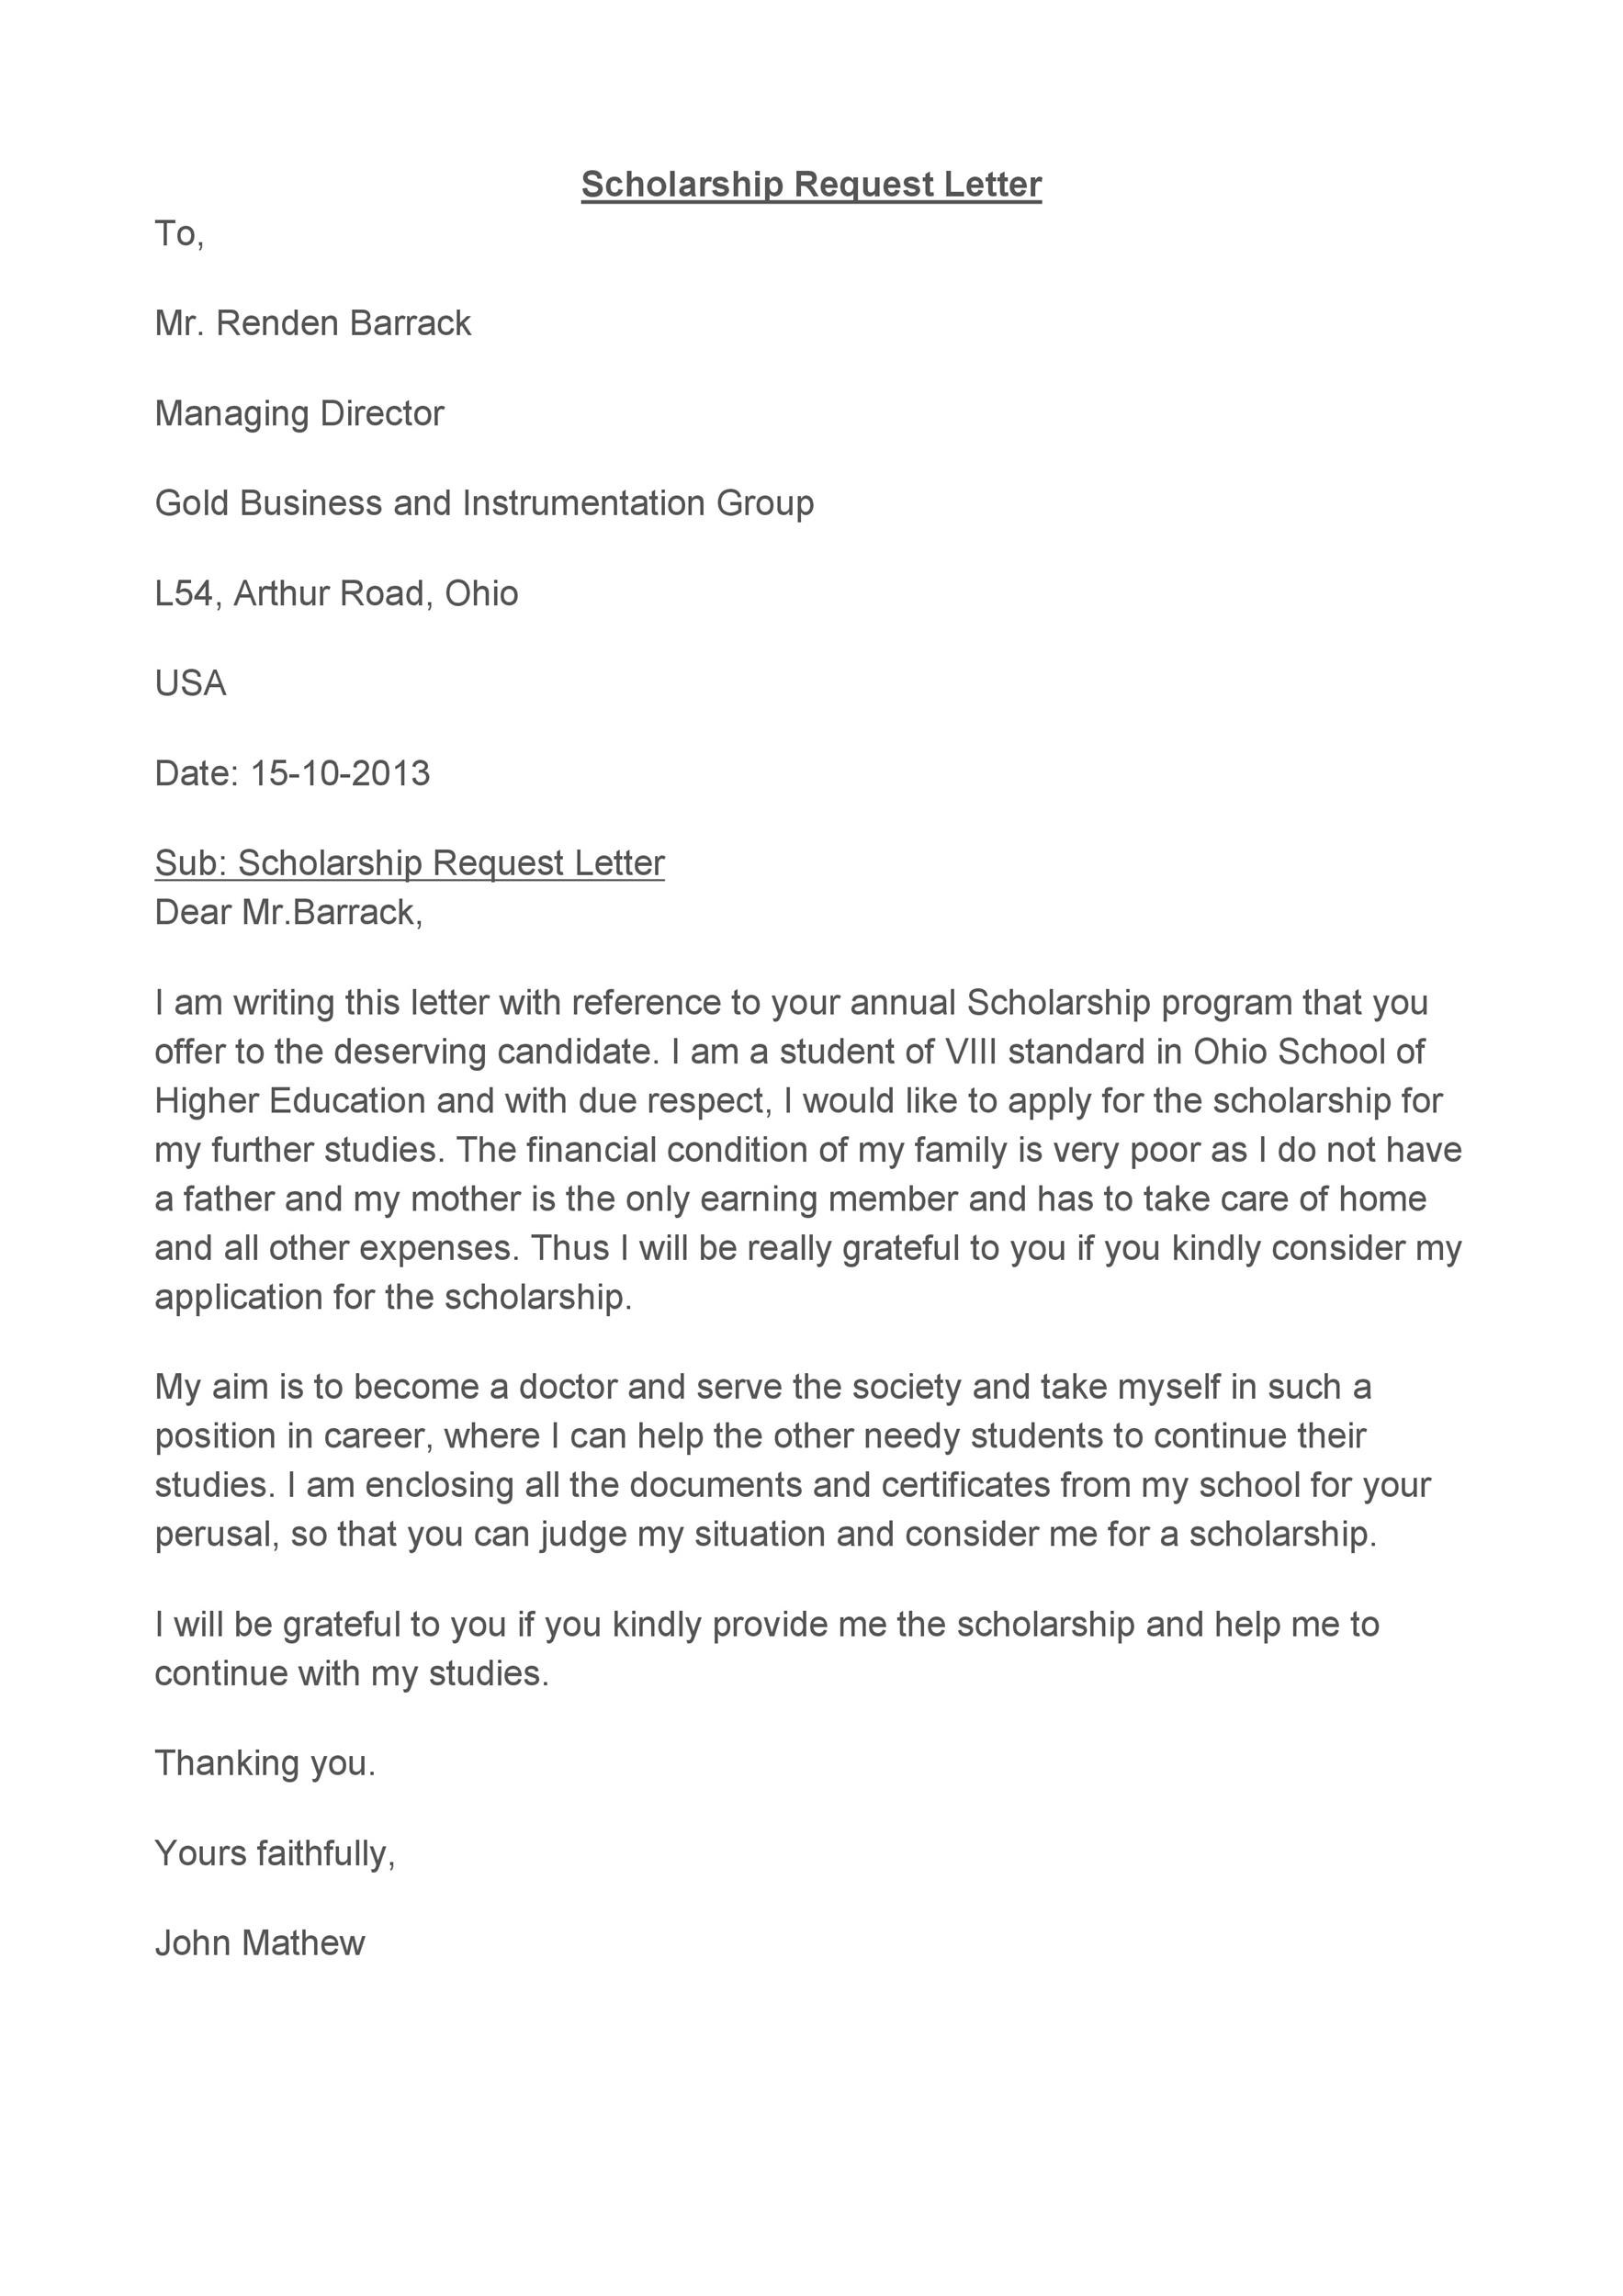 Request Letter For Scholarship From Parents from templatelab.com